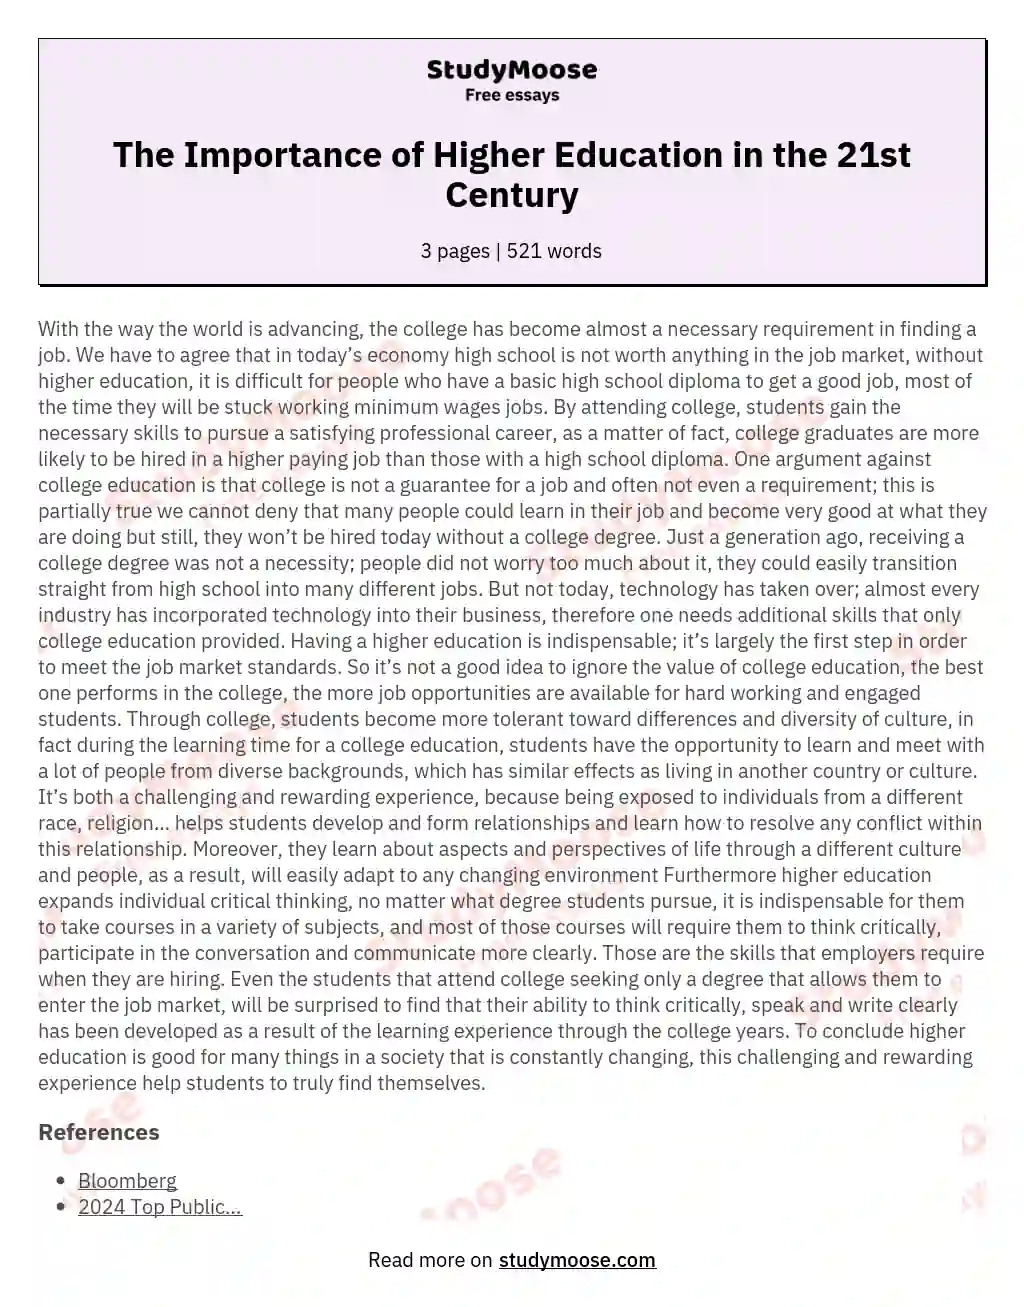 the importance of higher education in the 21st century essay